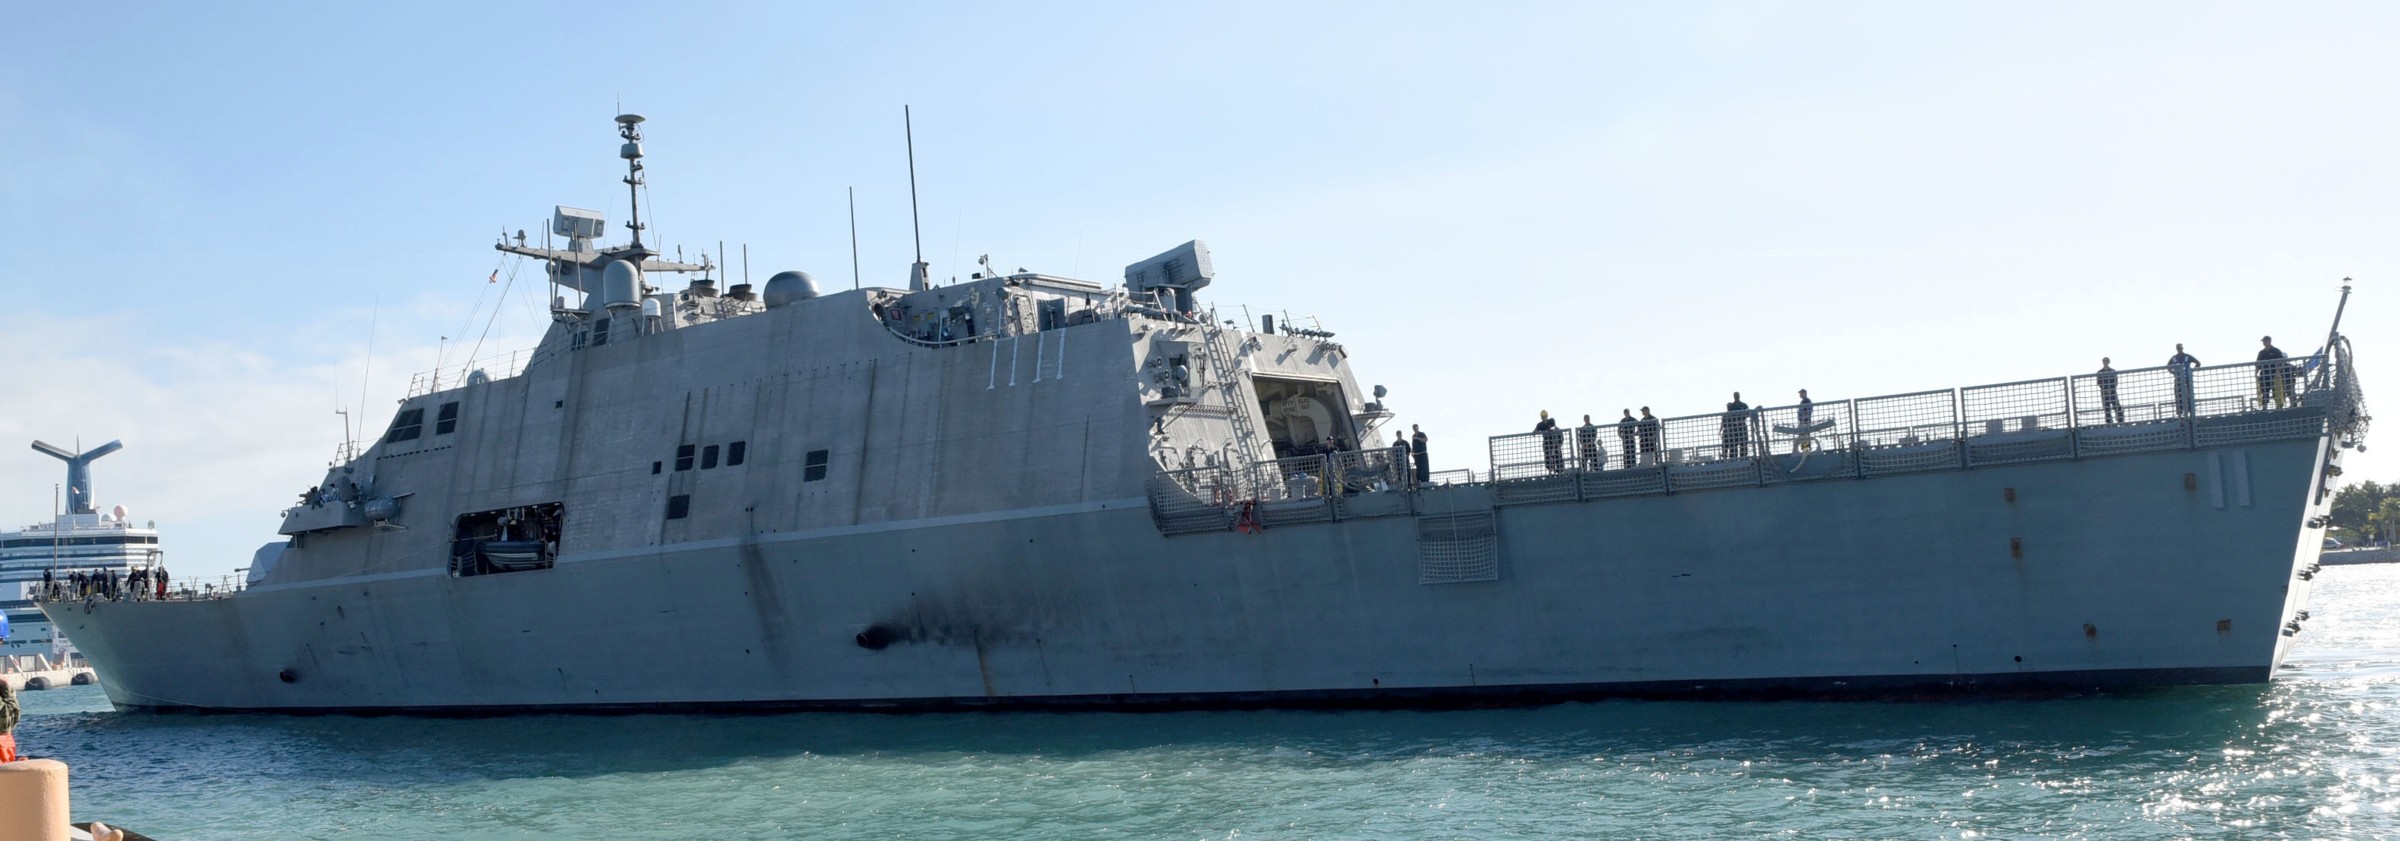 lcs-11 uss sioux city freedom class littoral combat ship us navy 32 nas key west florida